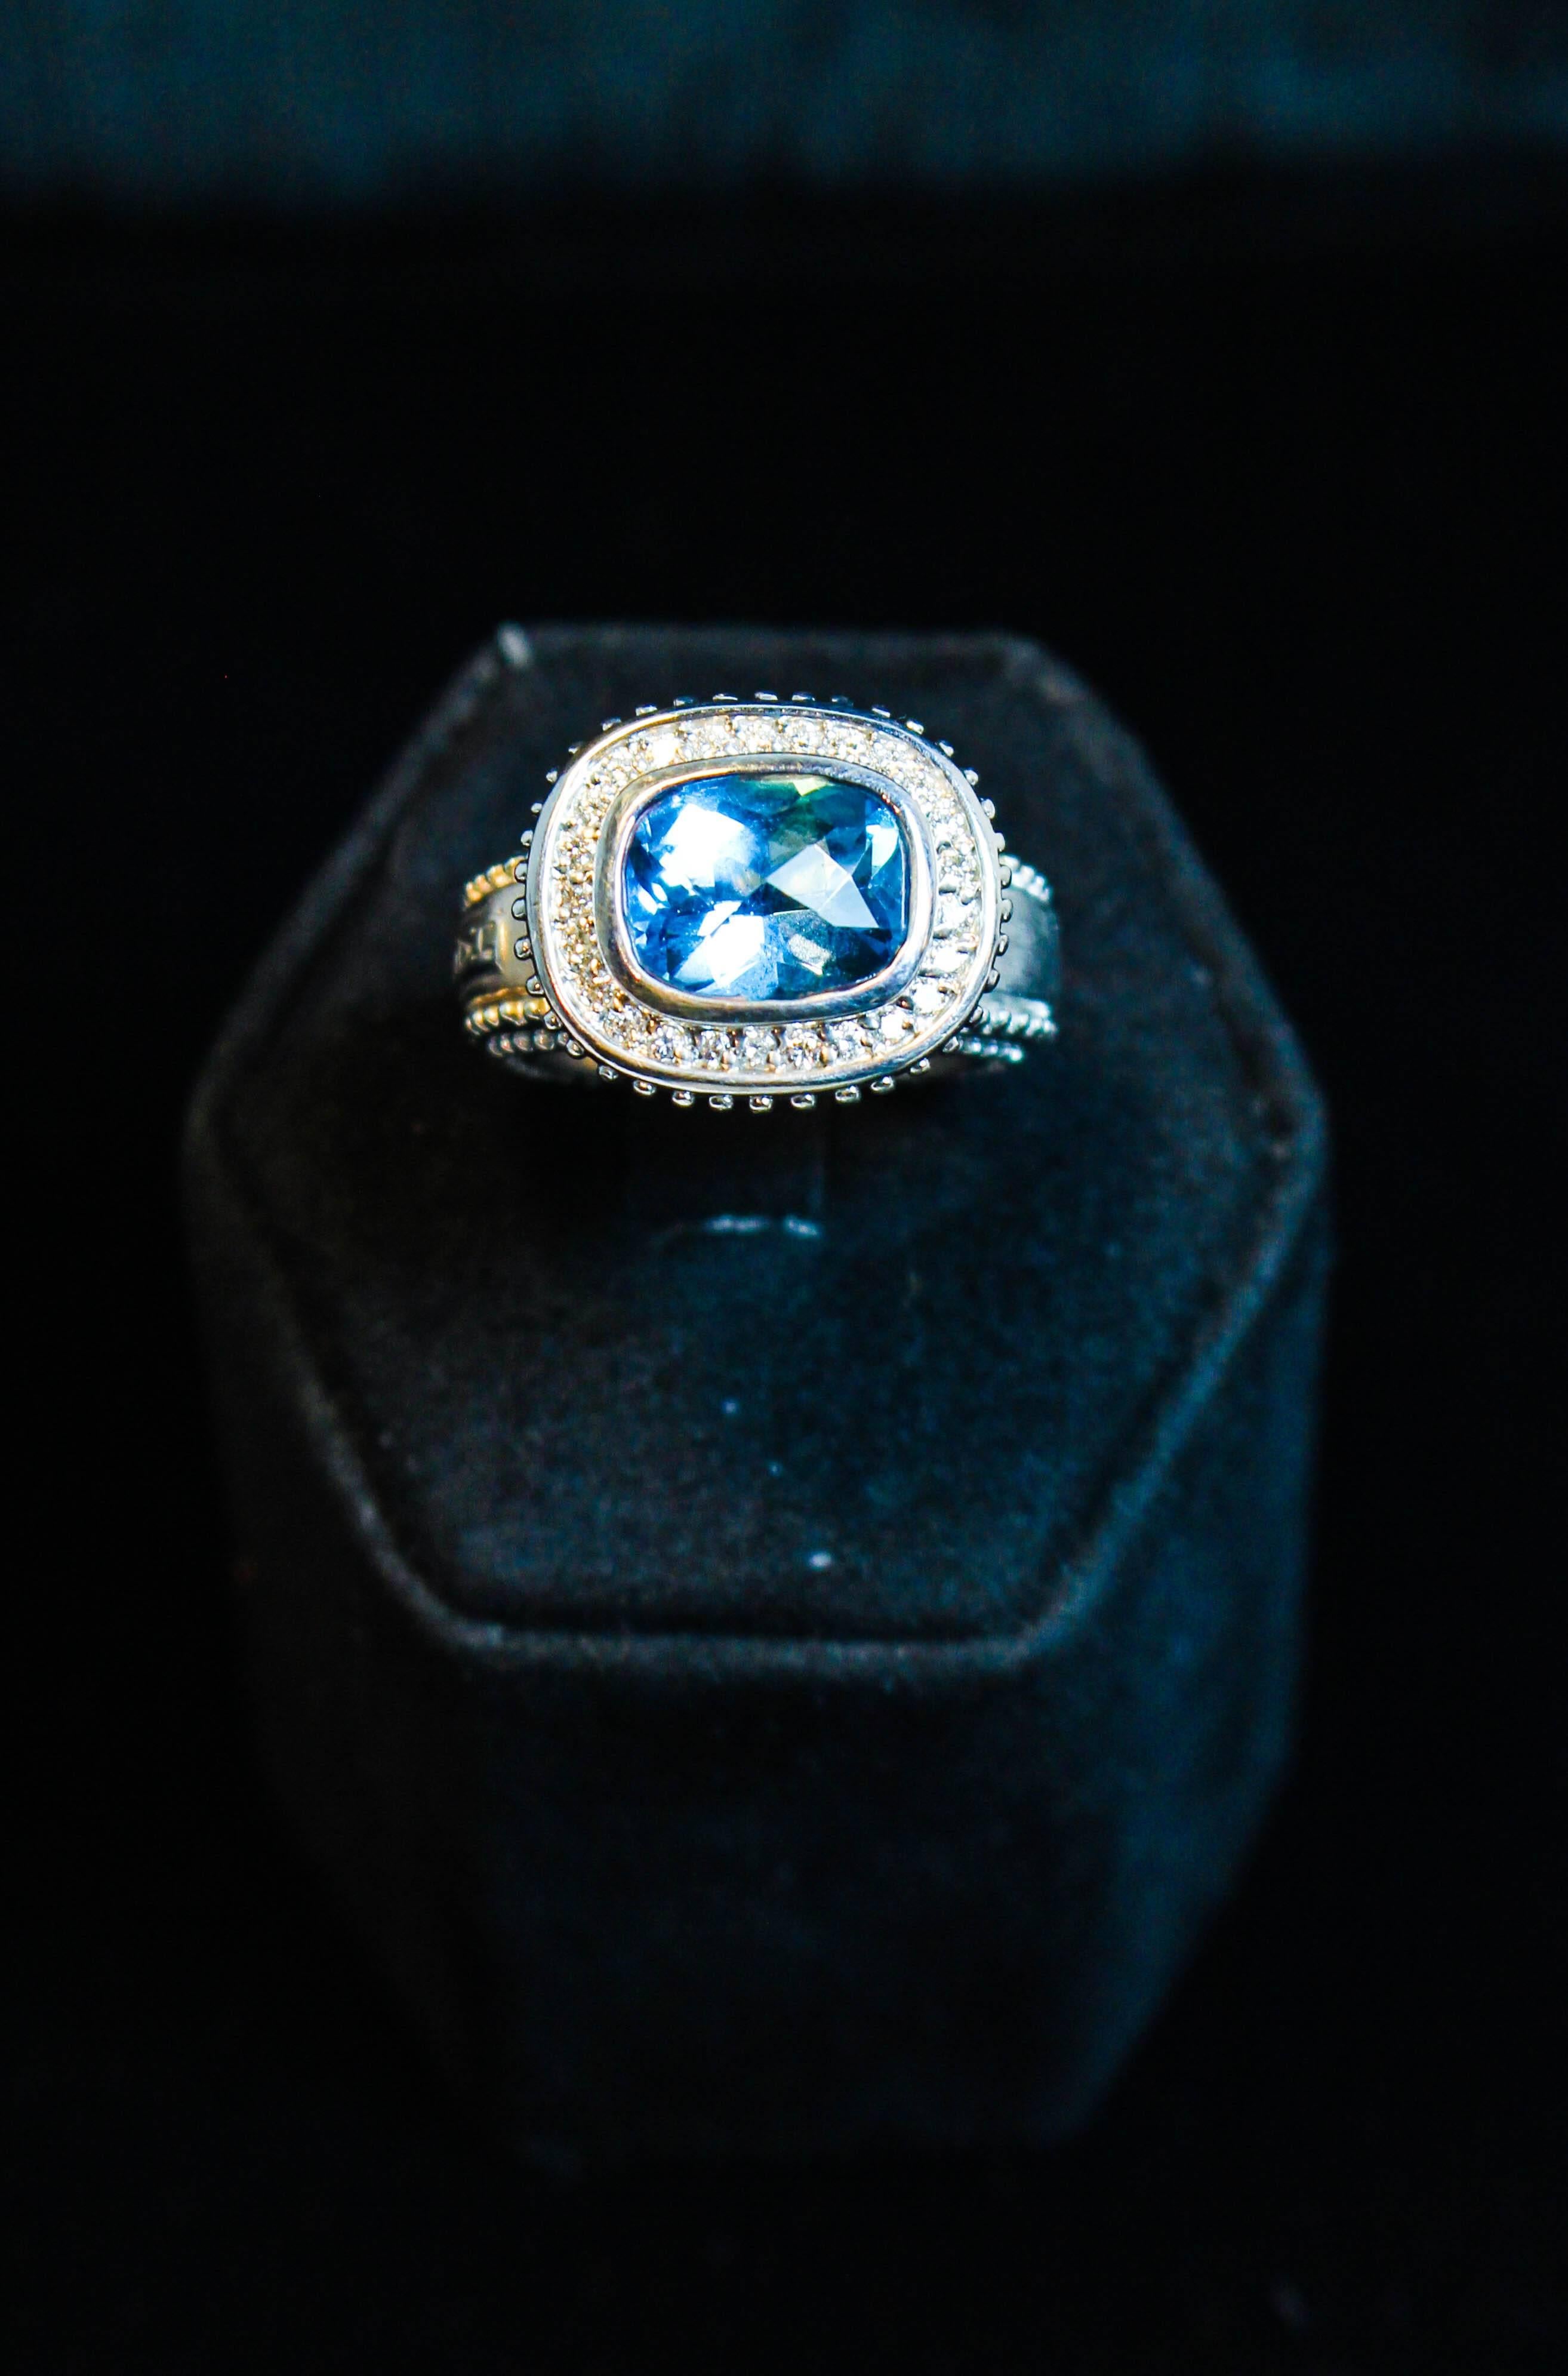 This beautiful ring features a stunning blue Topaz center stone and is composed of 18kt white gold. There are pave diamond accents. Specs below. In excellent condition.

Please feel free to ask any questions you may have, we are happy to assist.